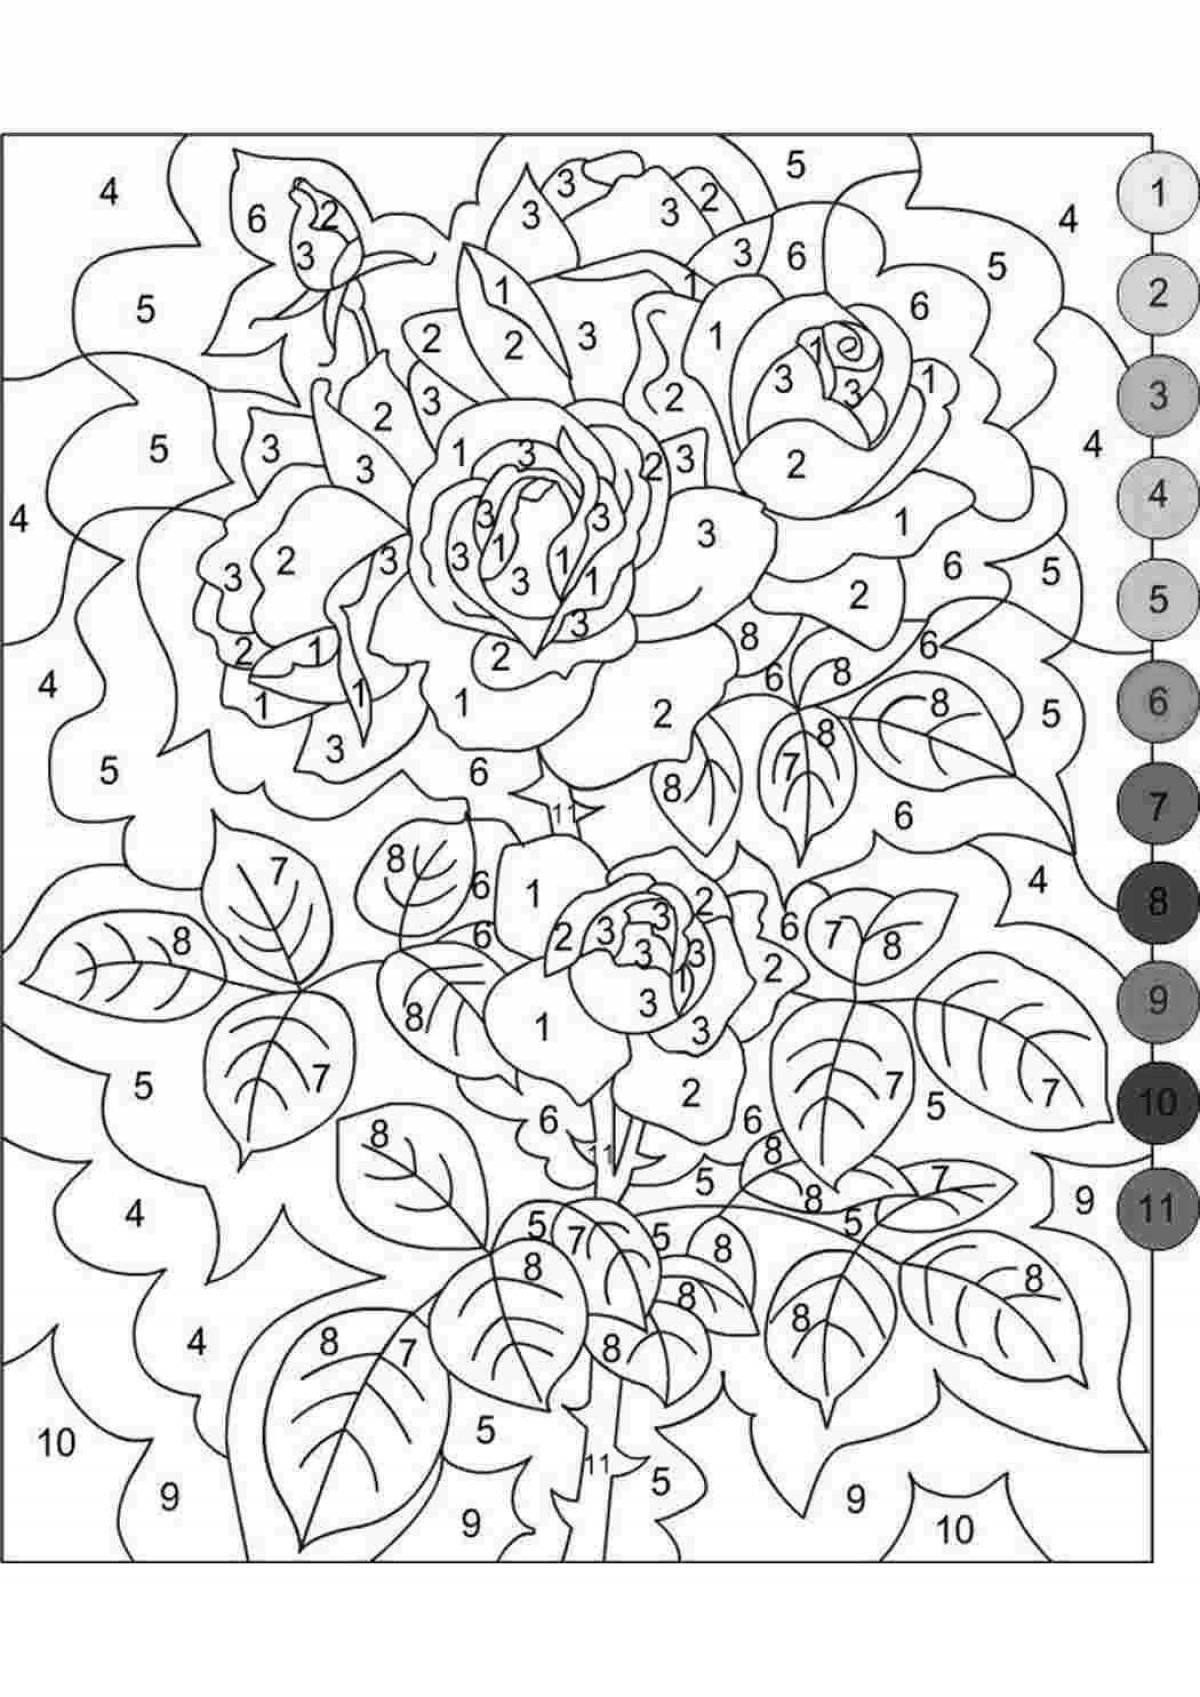 Intriguing paint by number coloring book